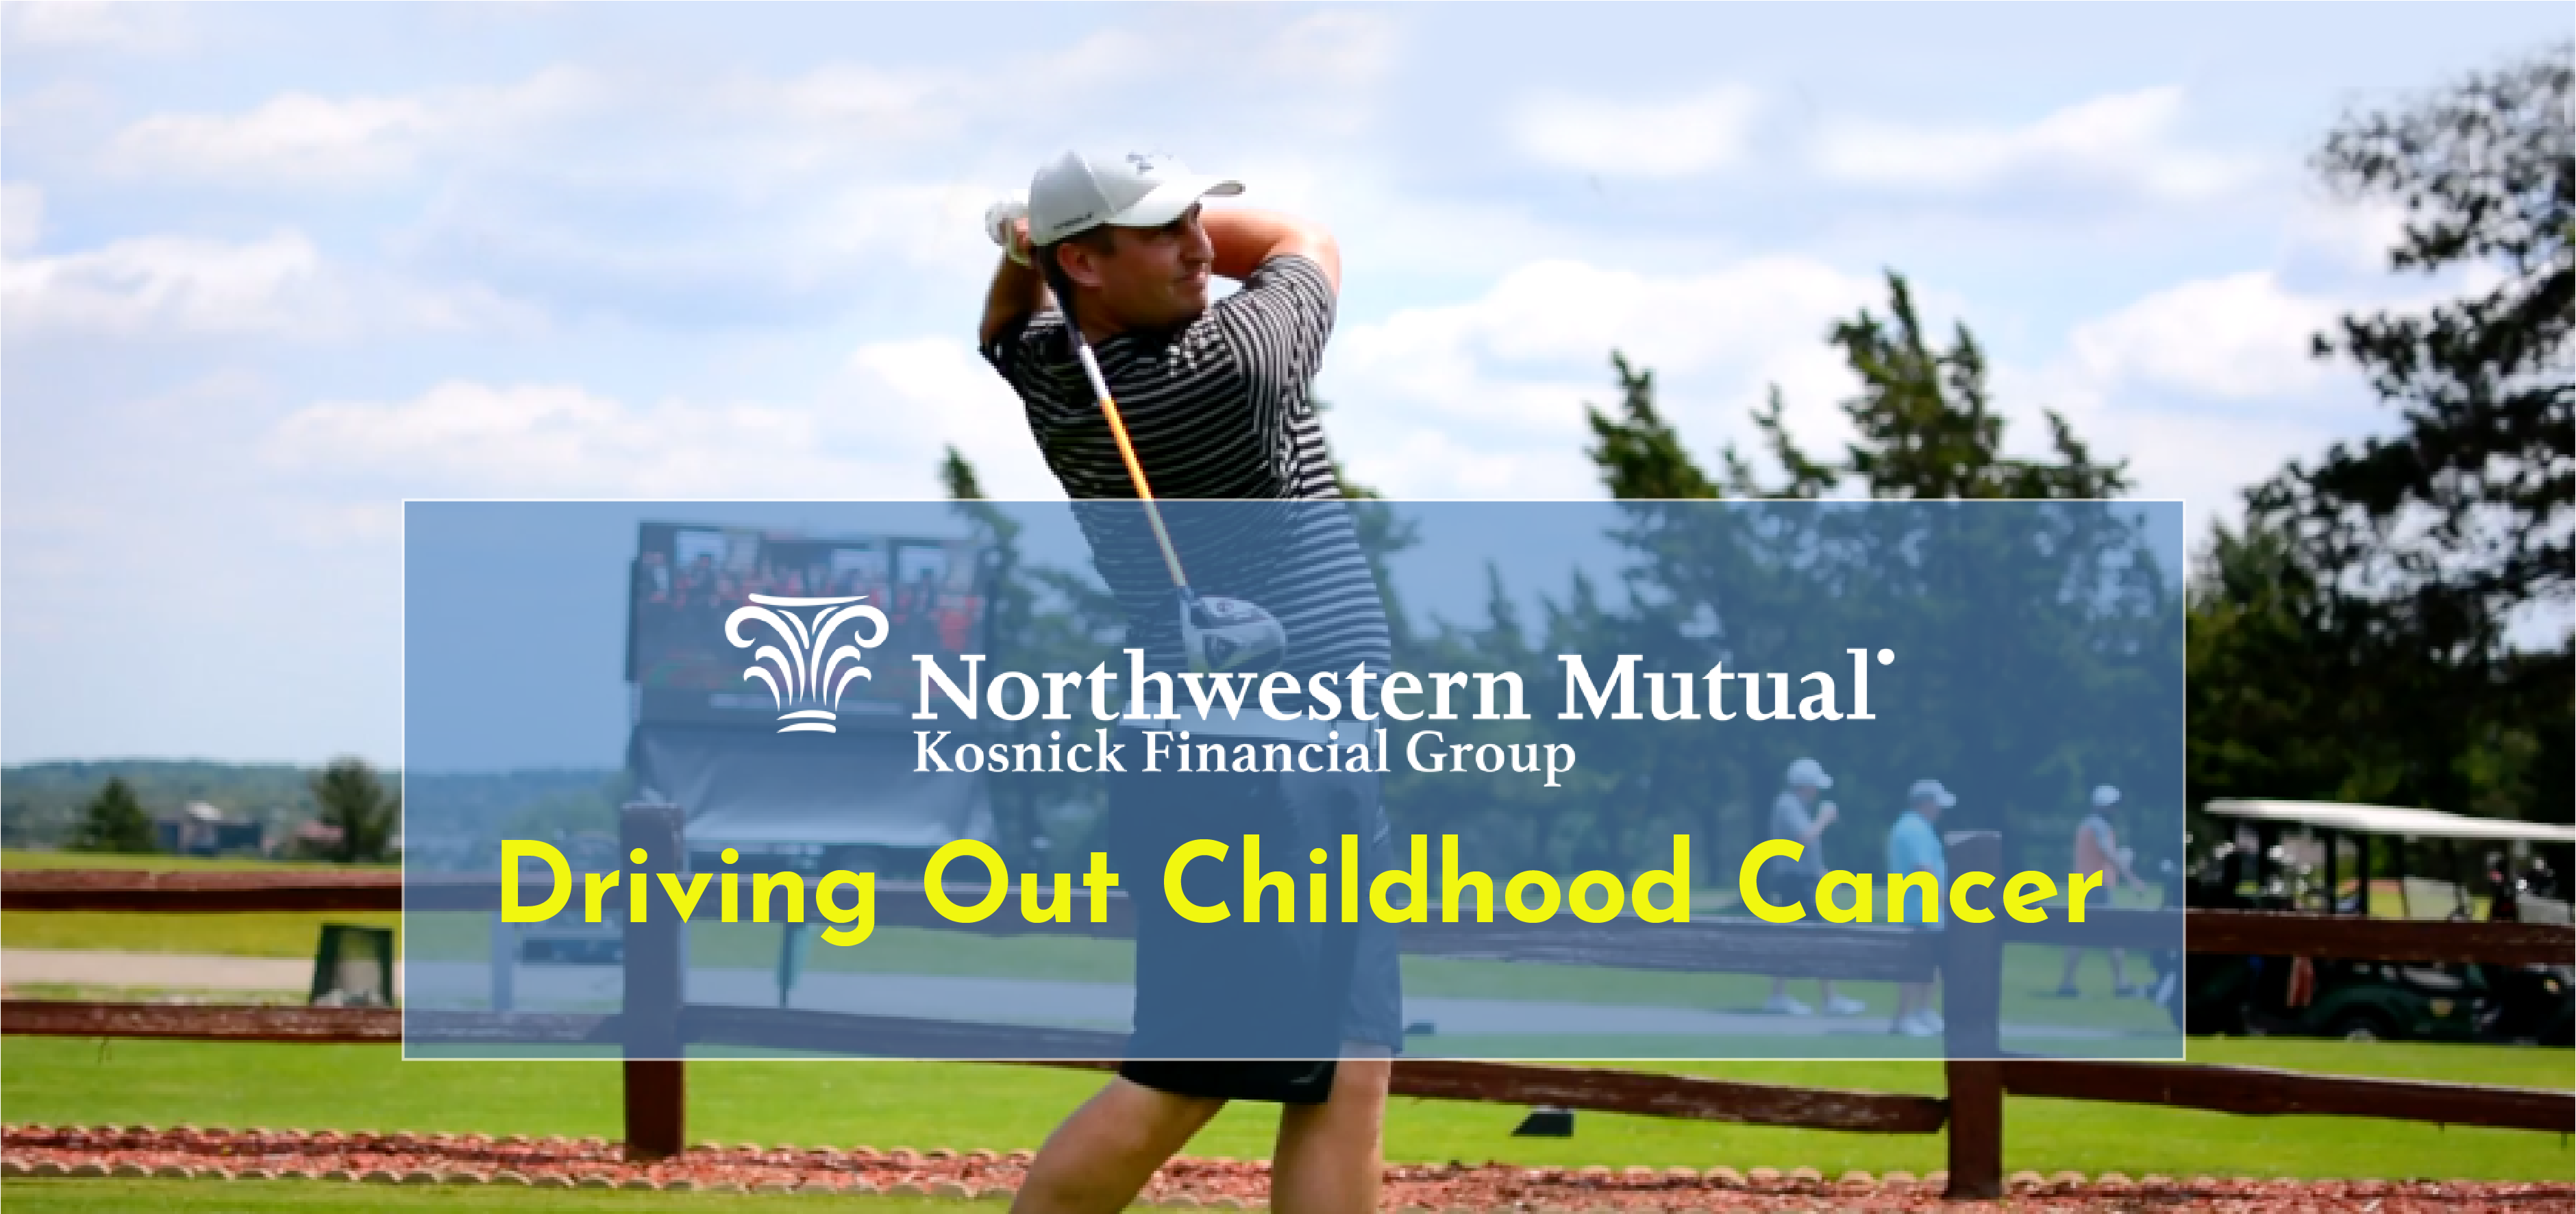 Driving Out Childhood Cancer Golf Outing 2020 - Northwestern Mutual, Kosnick Financial Group